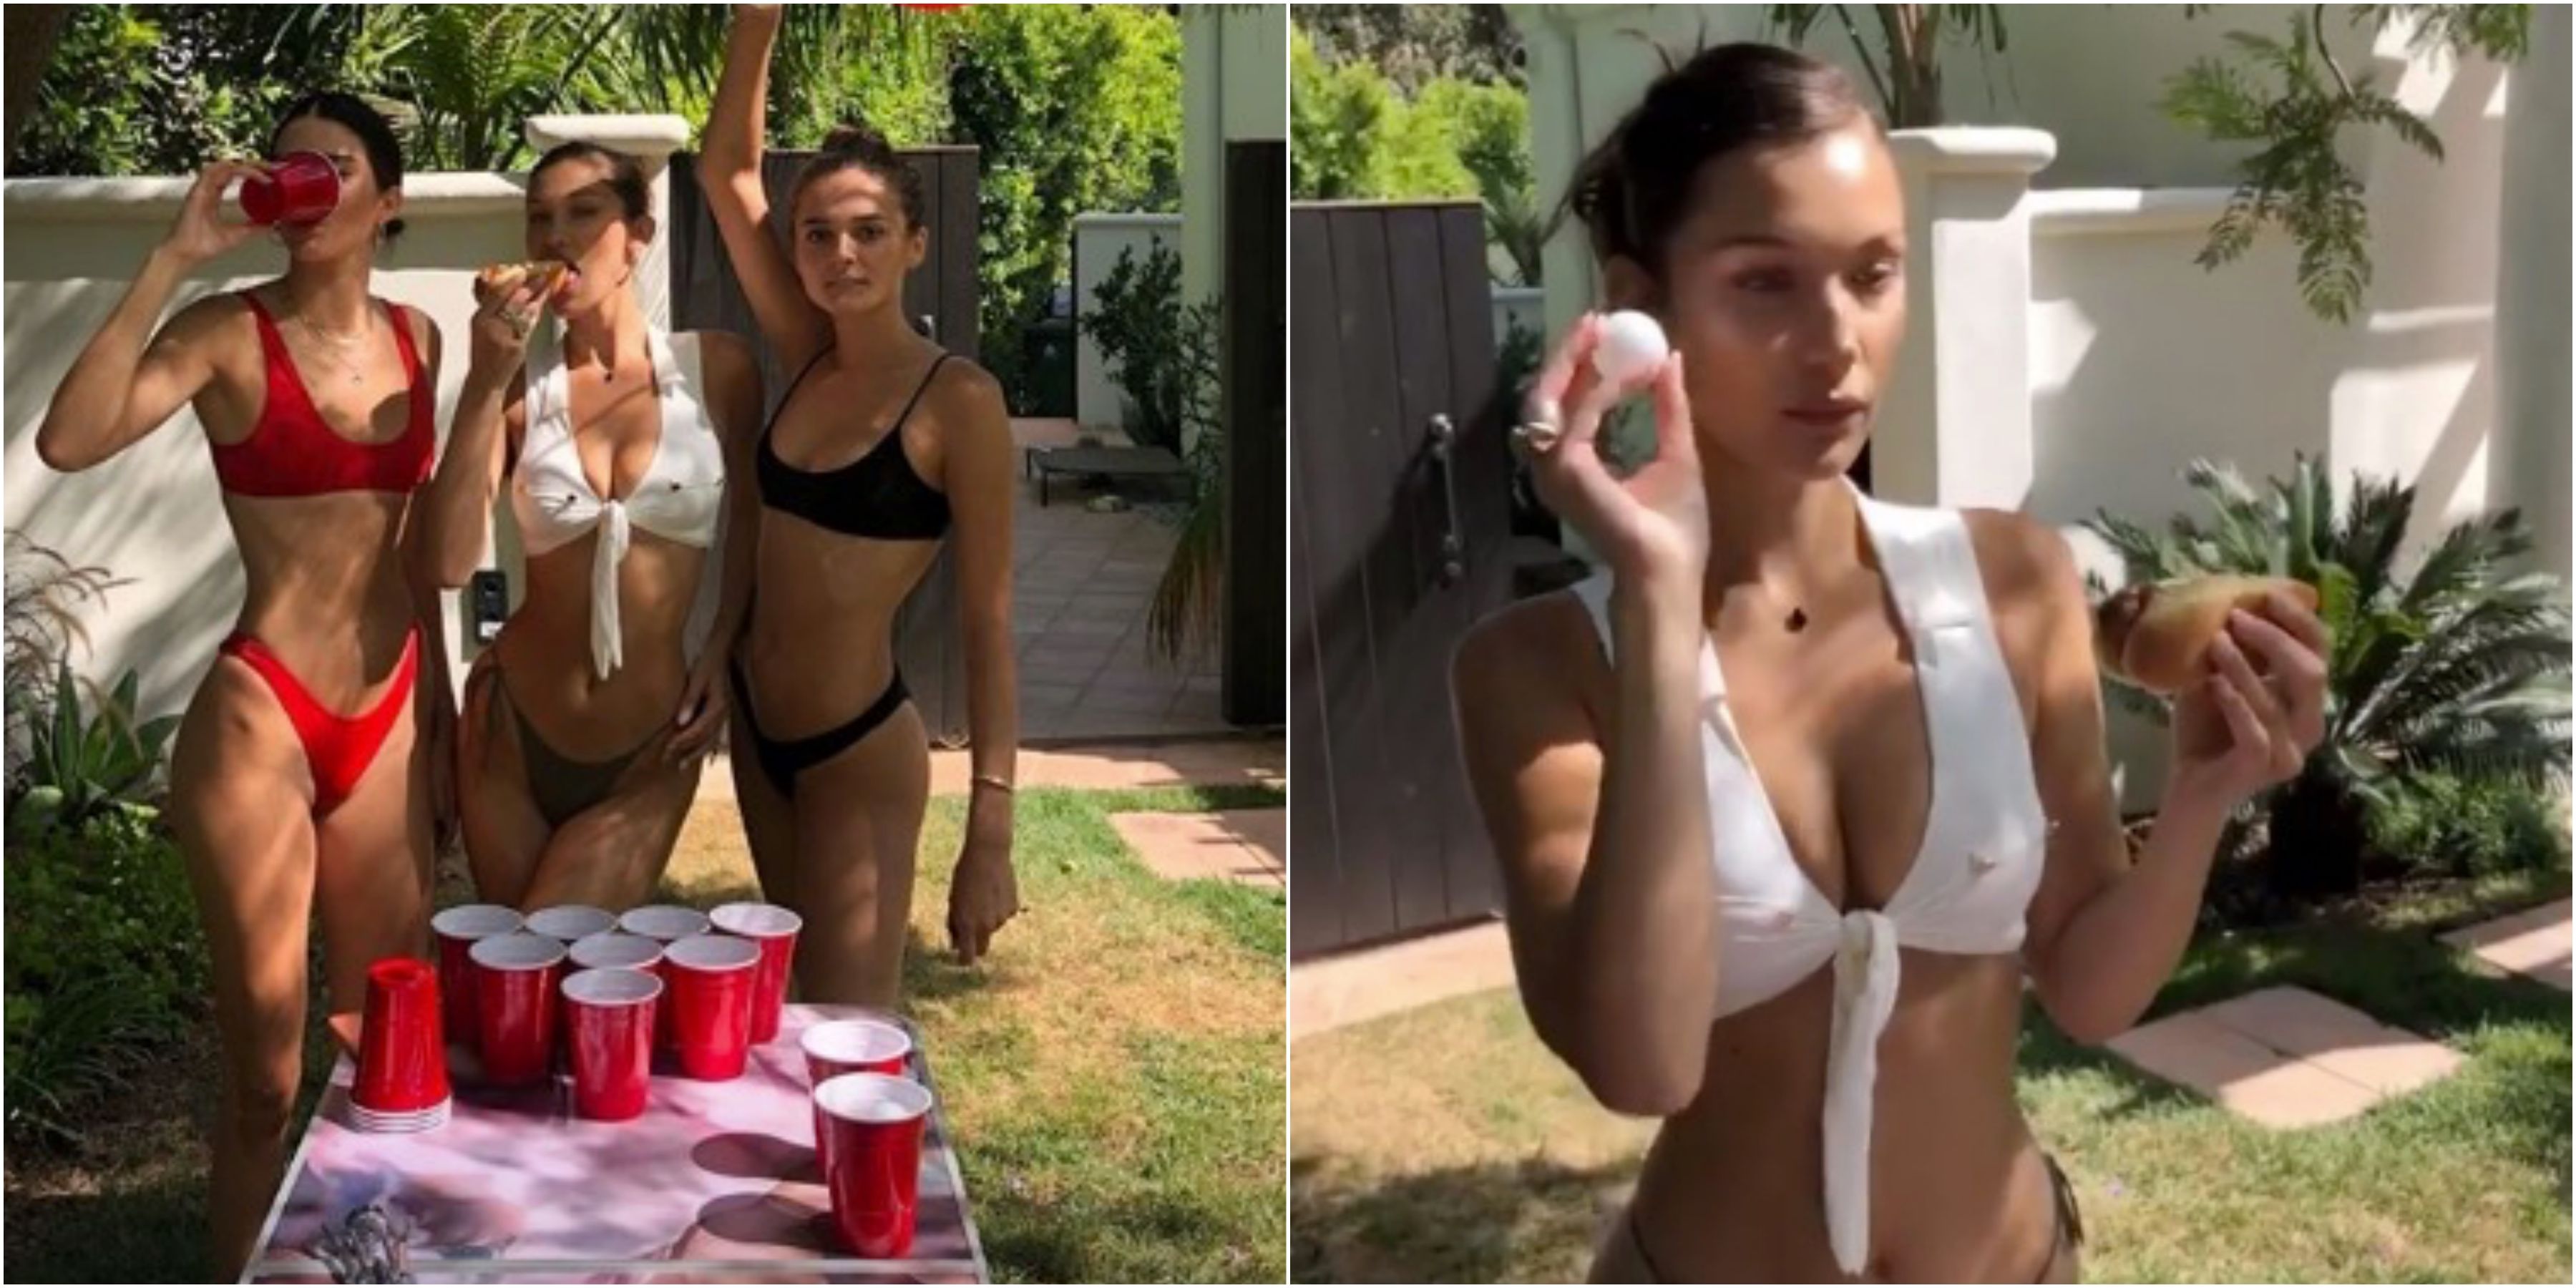 Kendall Jenner And Bella Hadid Join Kim Kardashian For Labour Day BBQ With All The Tequila